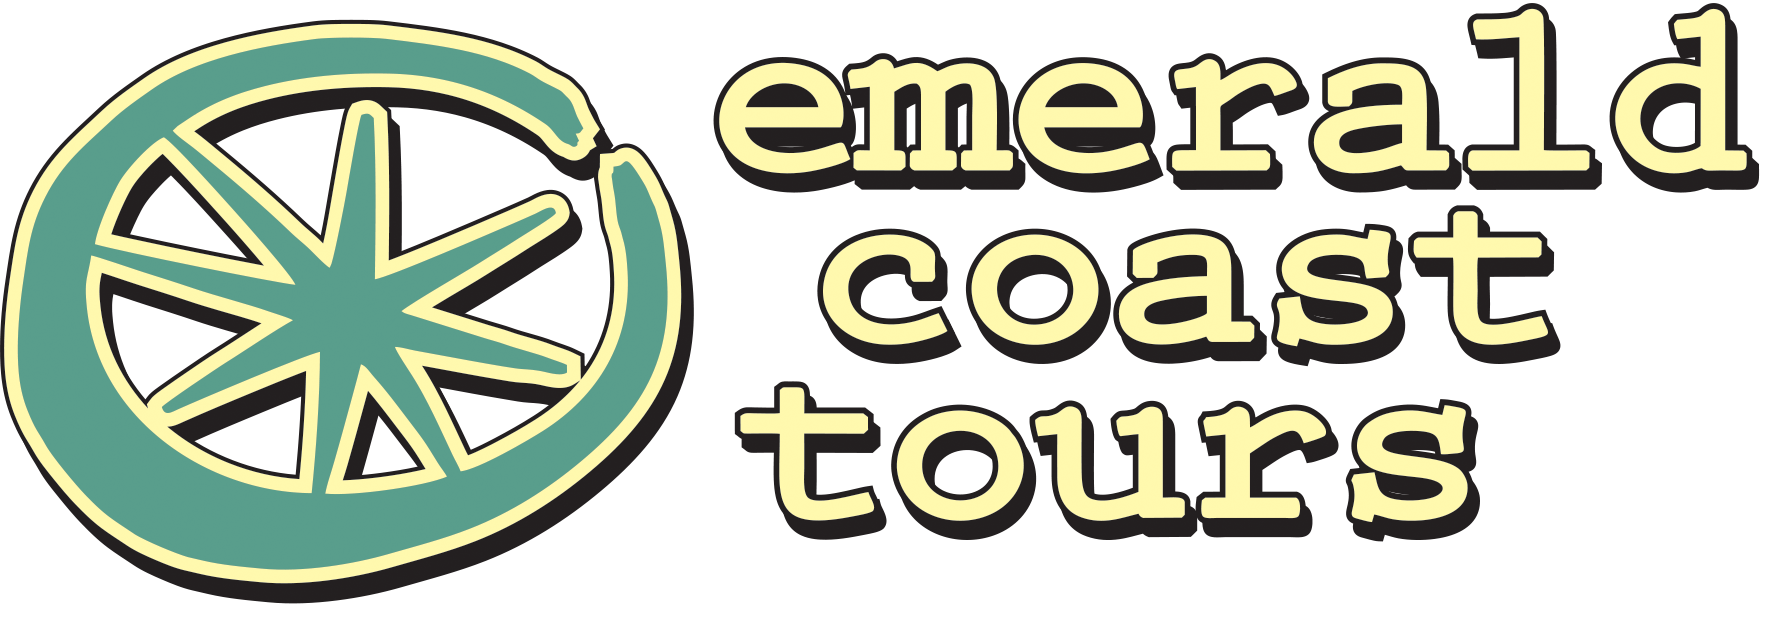 Emerald Coast Tours - Things to do in Pensacola